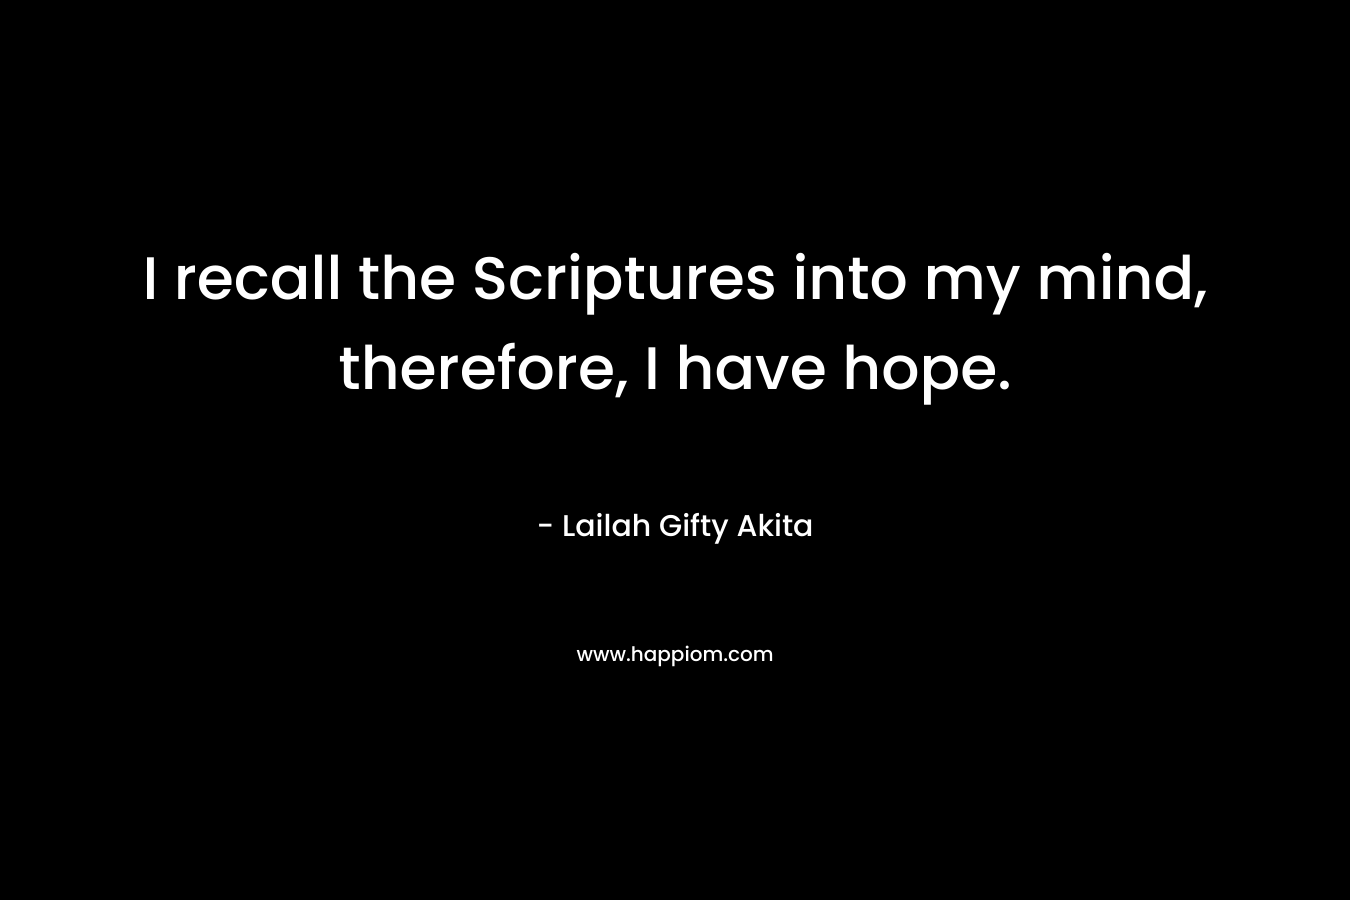 I recall the Scriptures into my mind, therefore, I have hope.